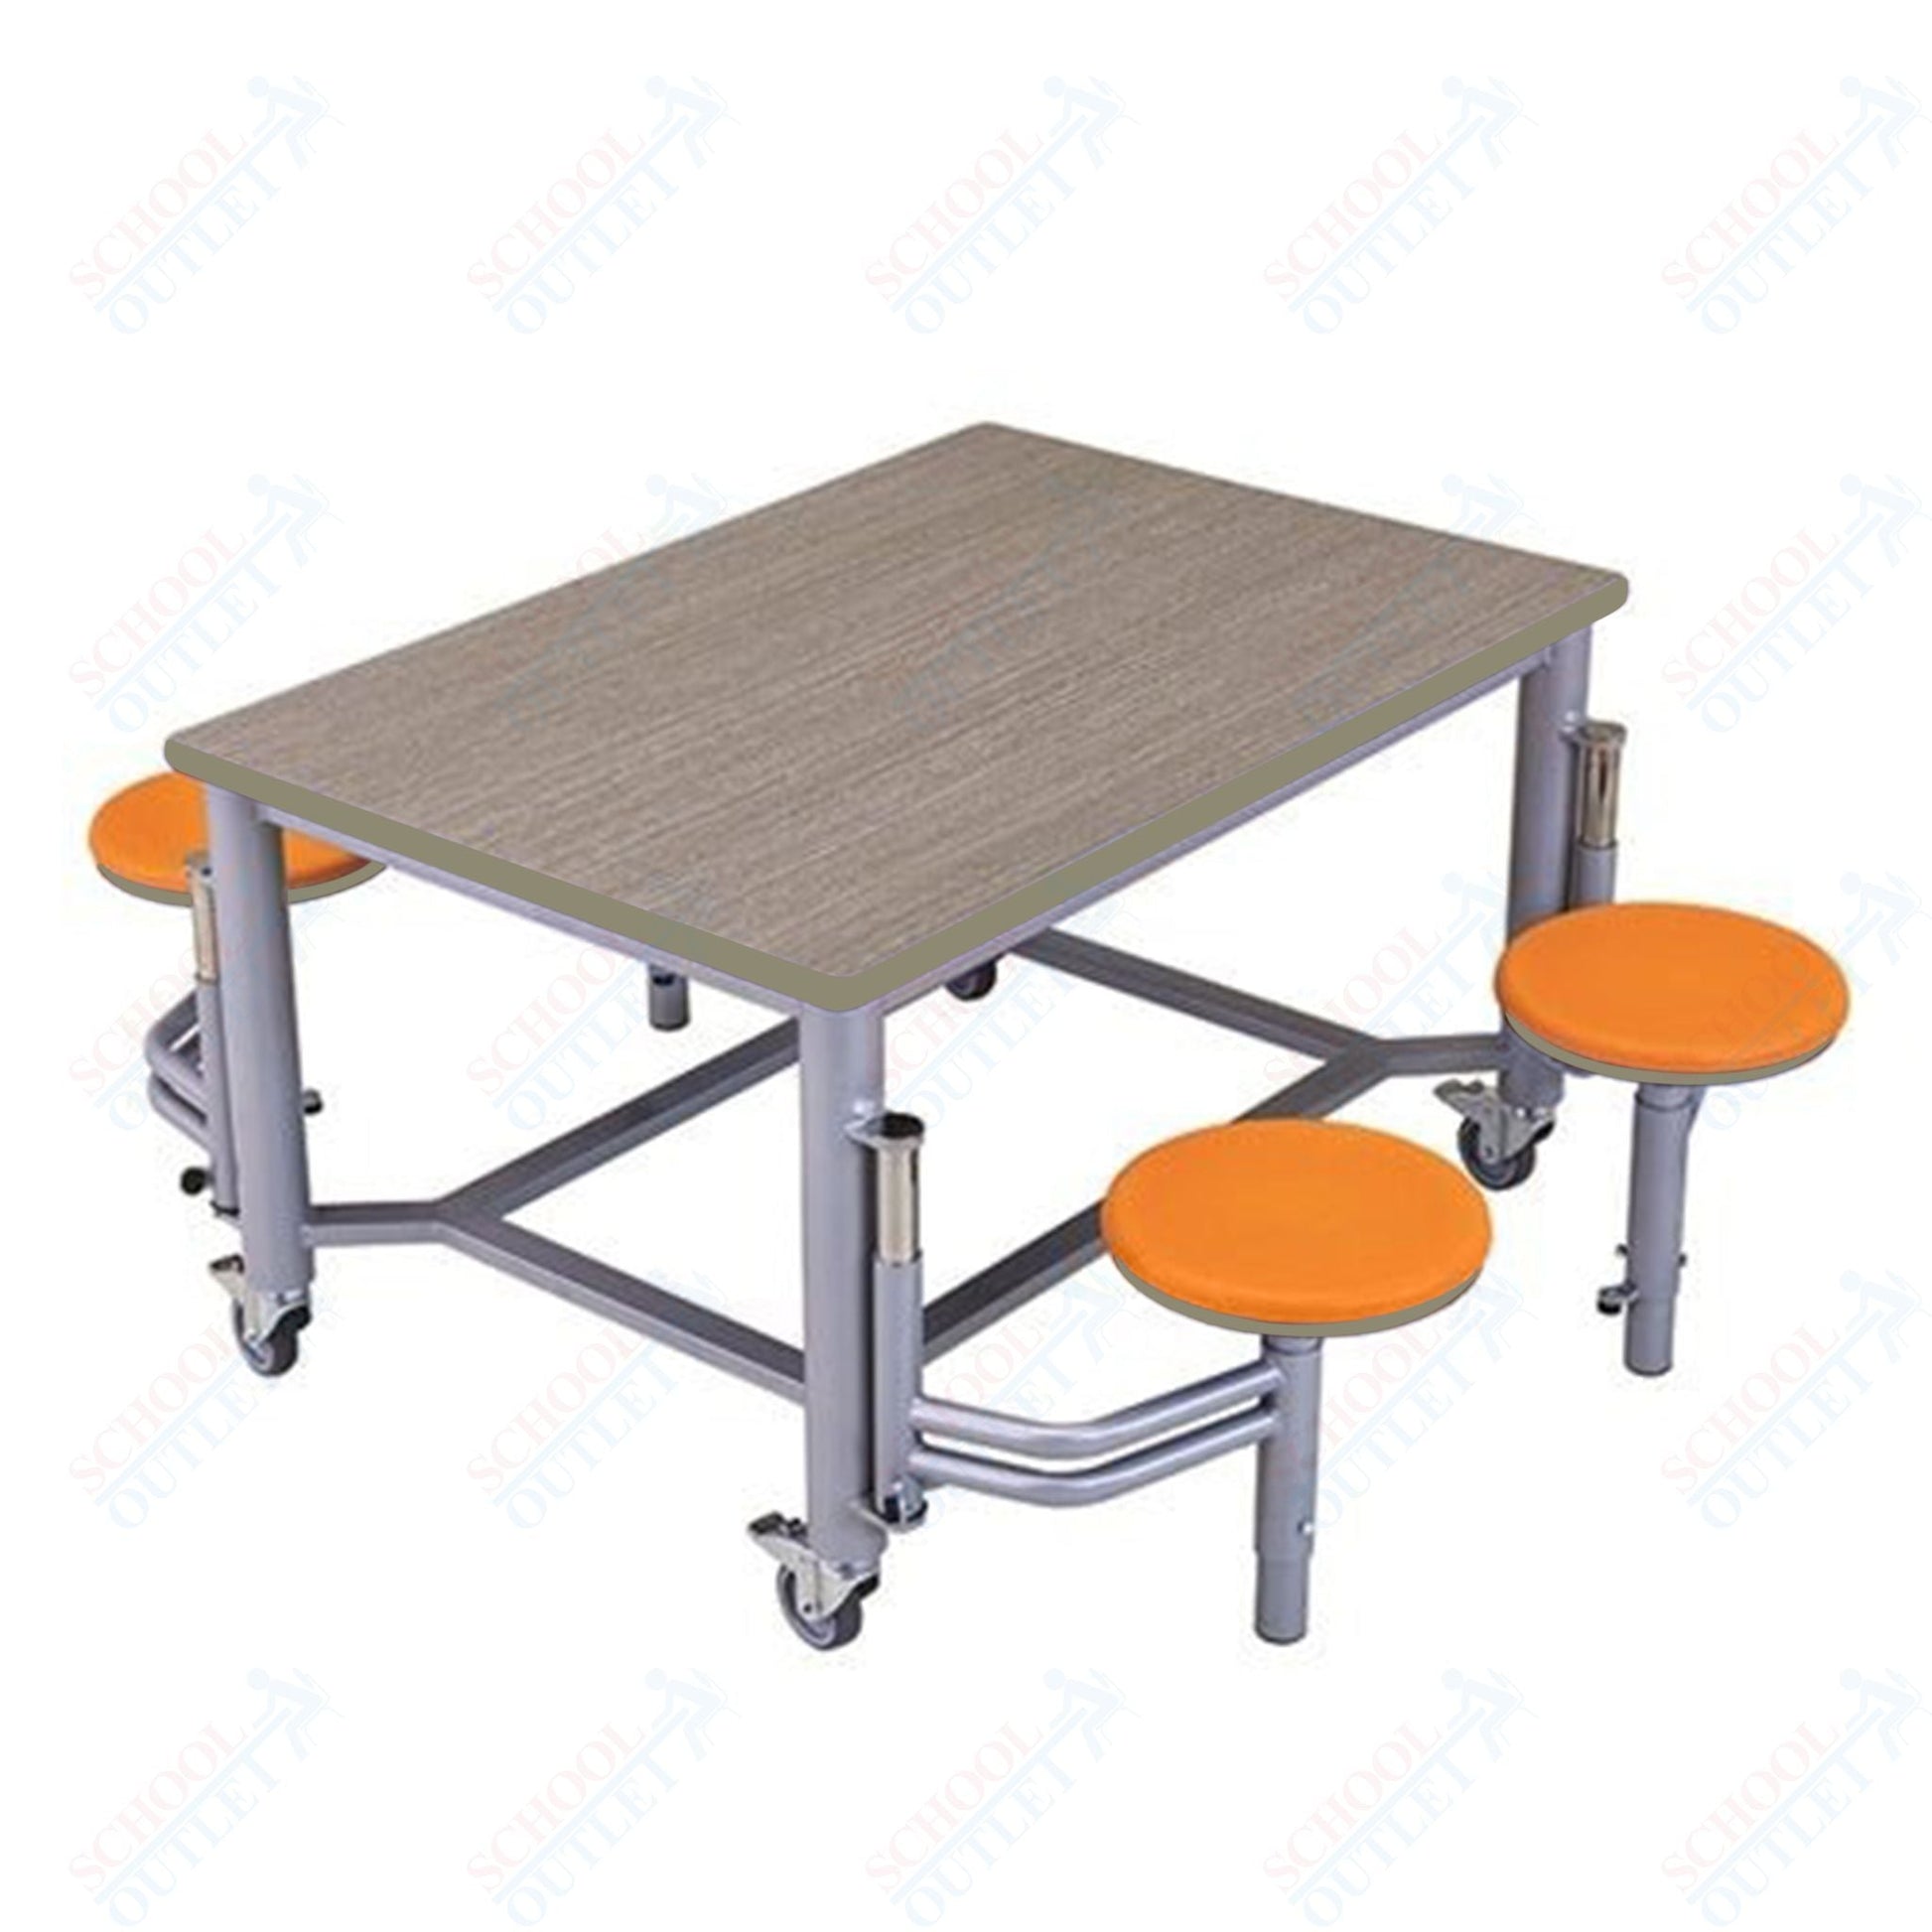 AmTab Mobile Stool Table - Group Collaboration High Table - 36"W x 52"L x 29"H - 4 Stools (AMT - MGST3652 - 29) - SchoolOutlet